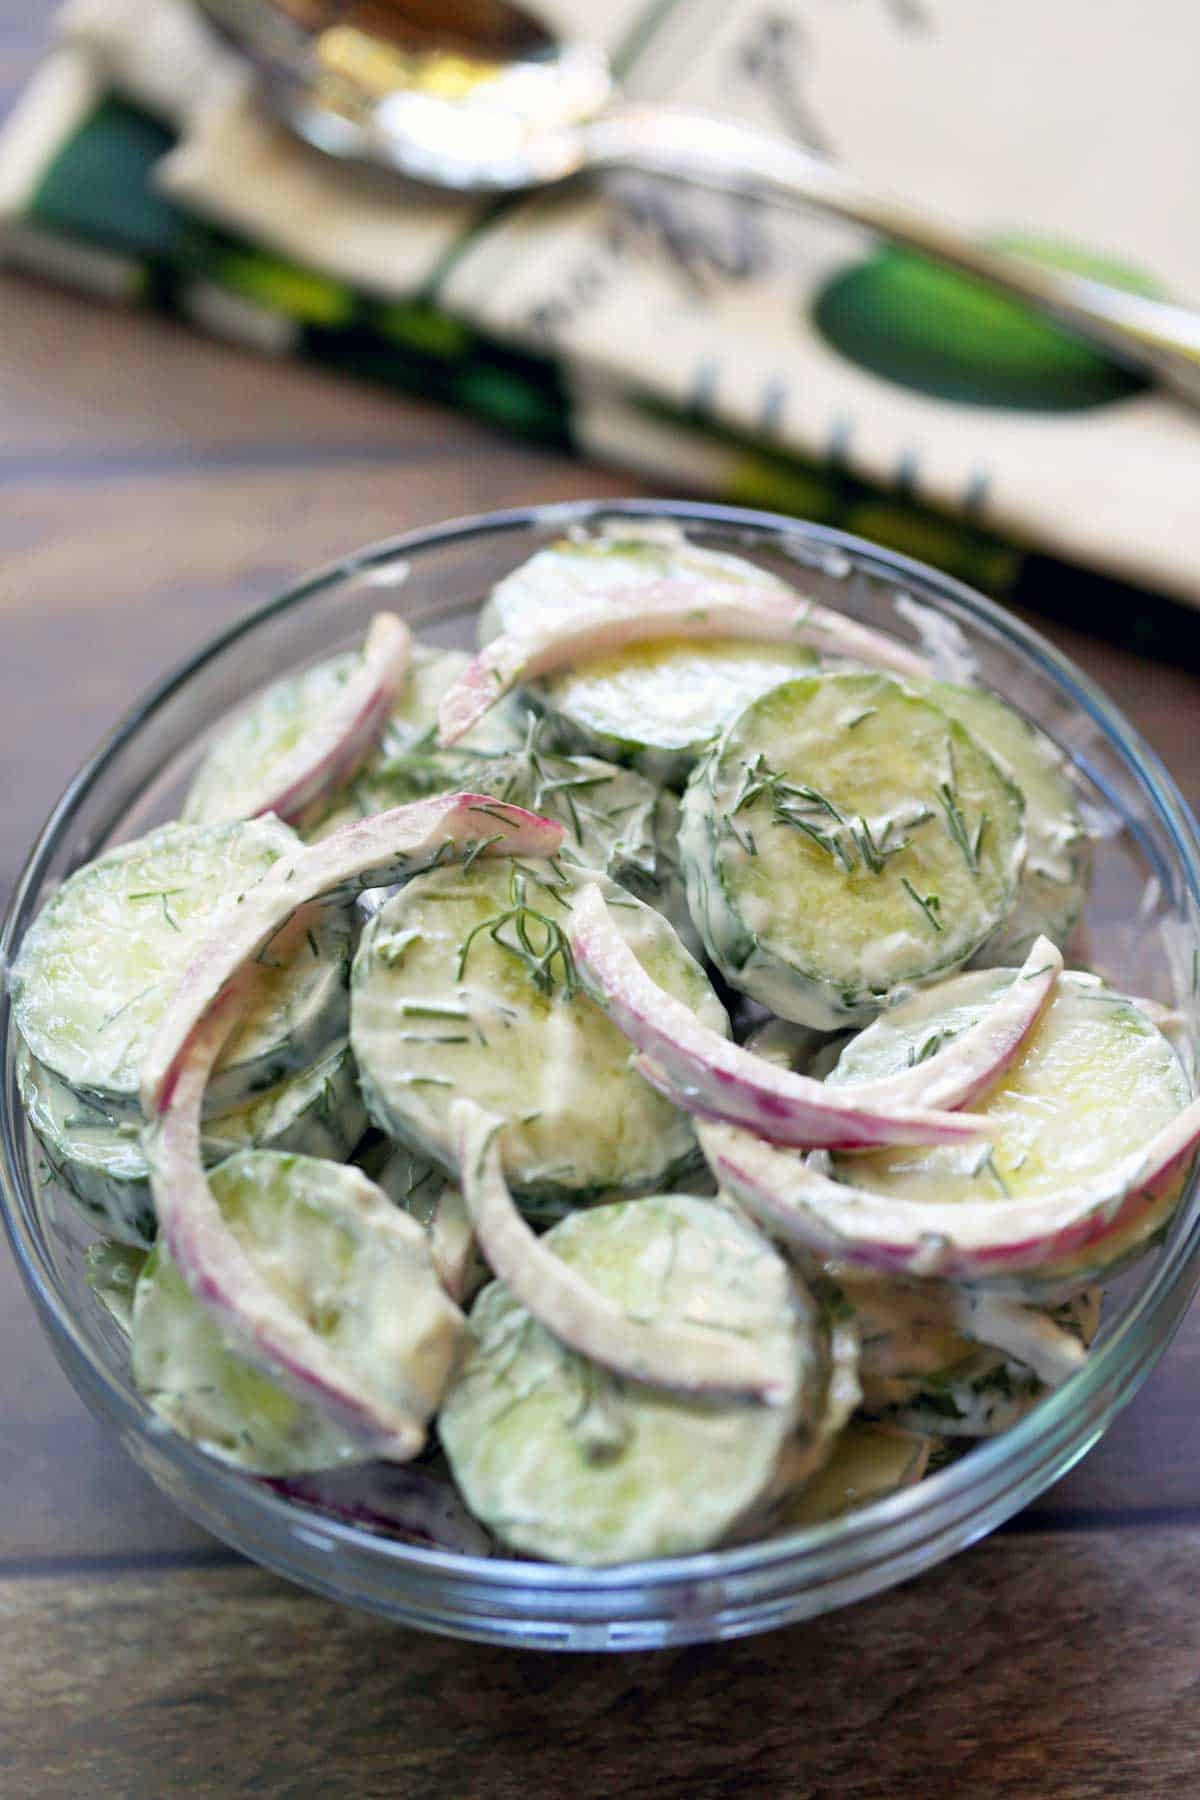 Creamy cucumber salad with onions, dill and sour cream, served in a glass bowl.